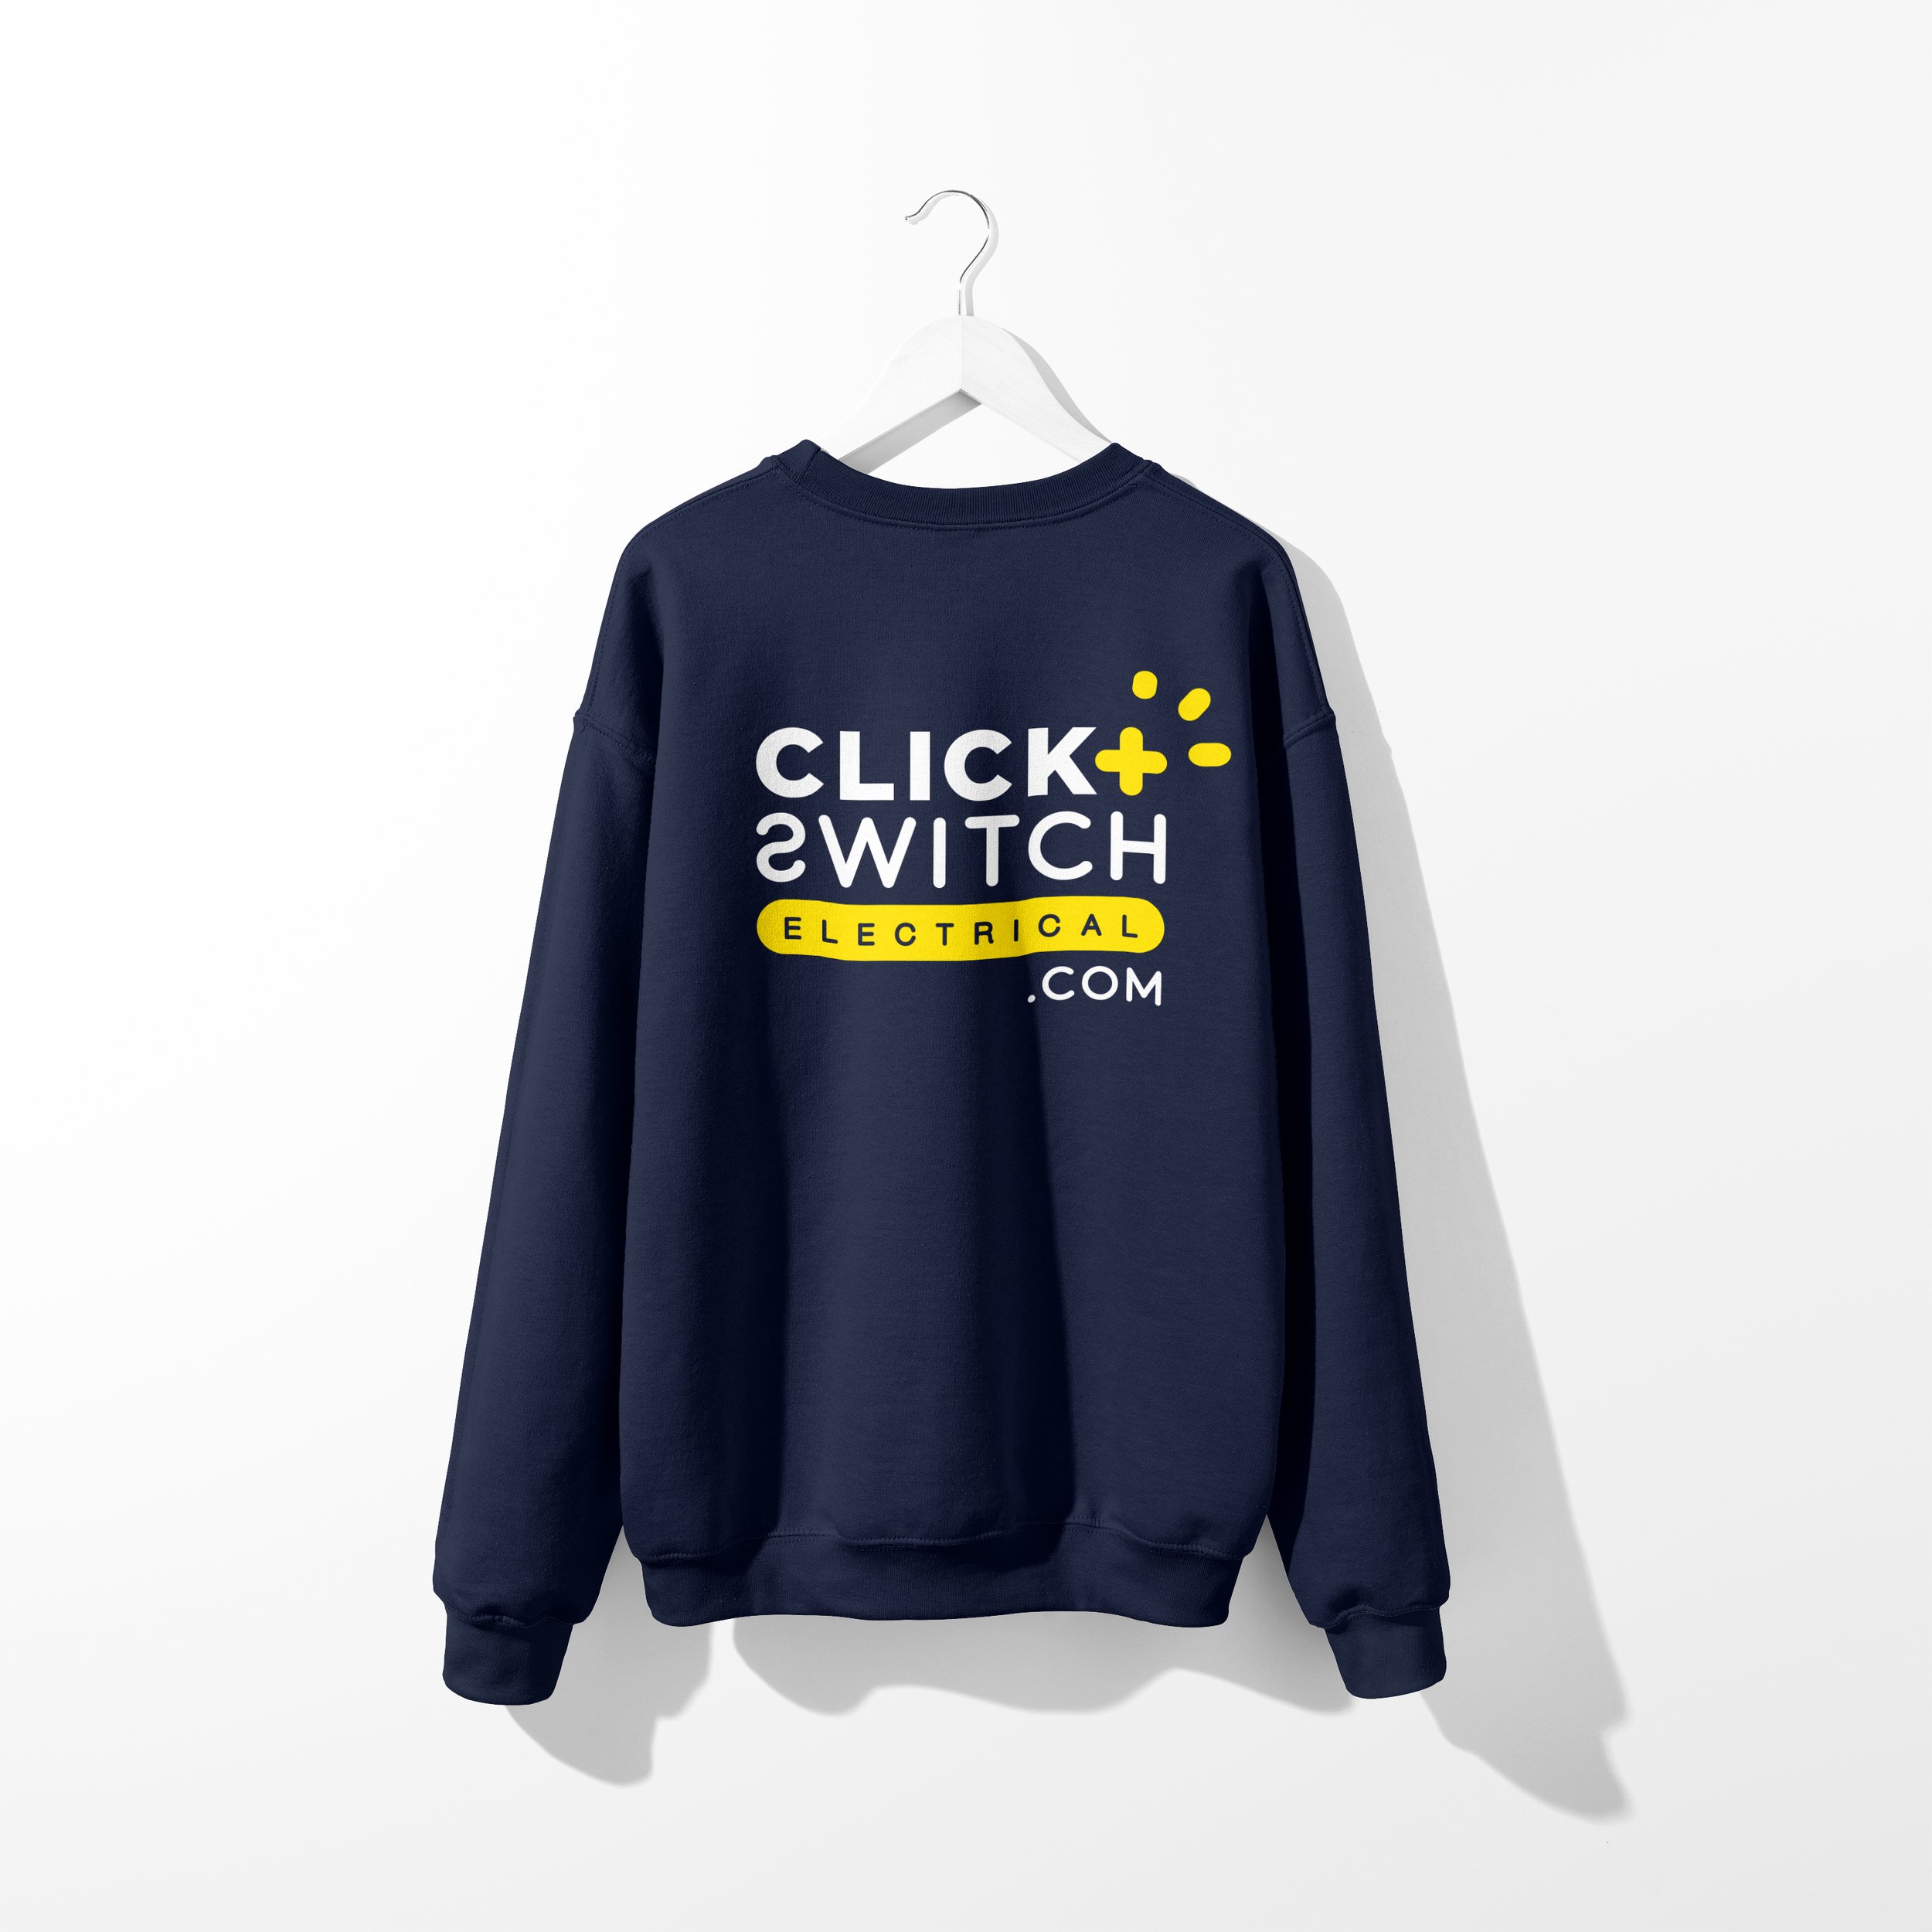 click and switch sweater.jpg